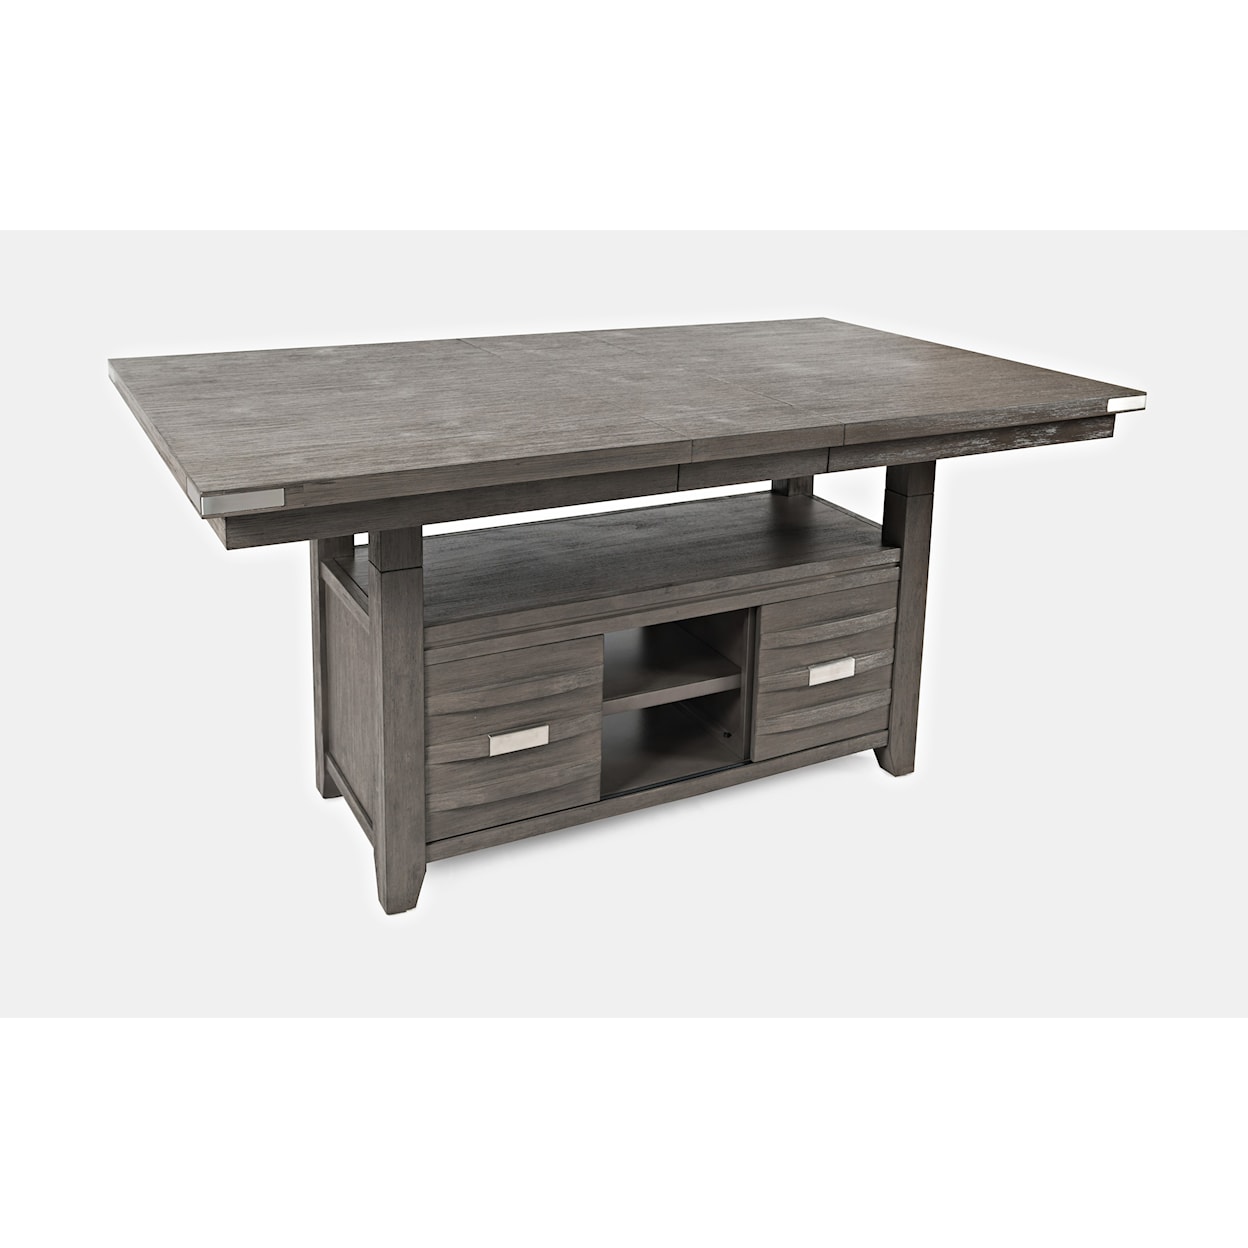 Jofran Altamonte - 1850 Counter Height Dining Table